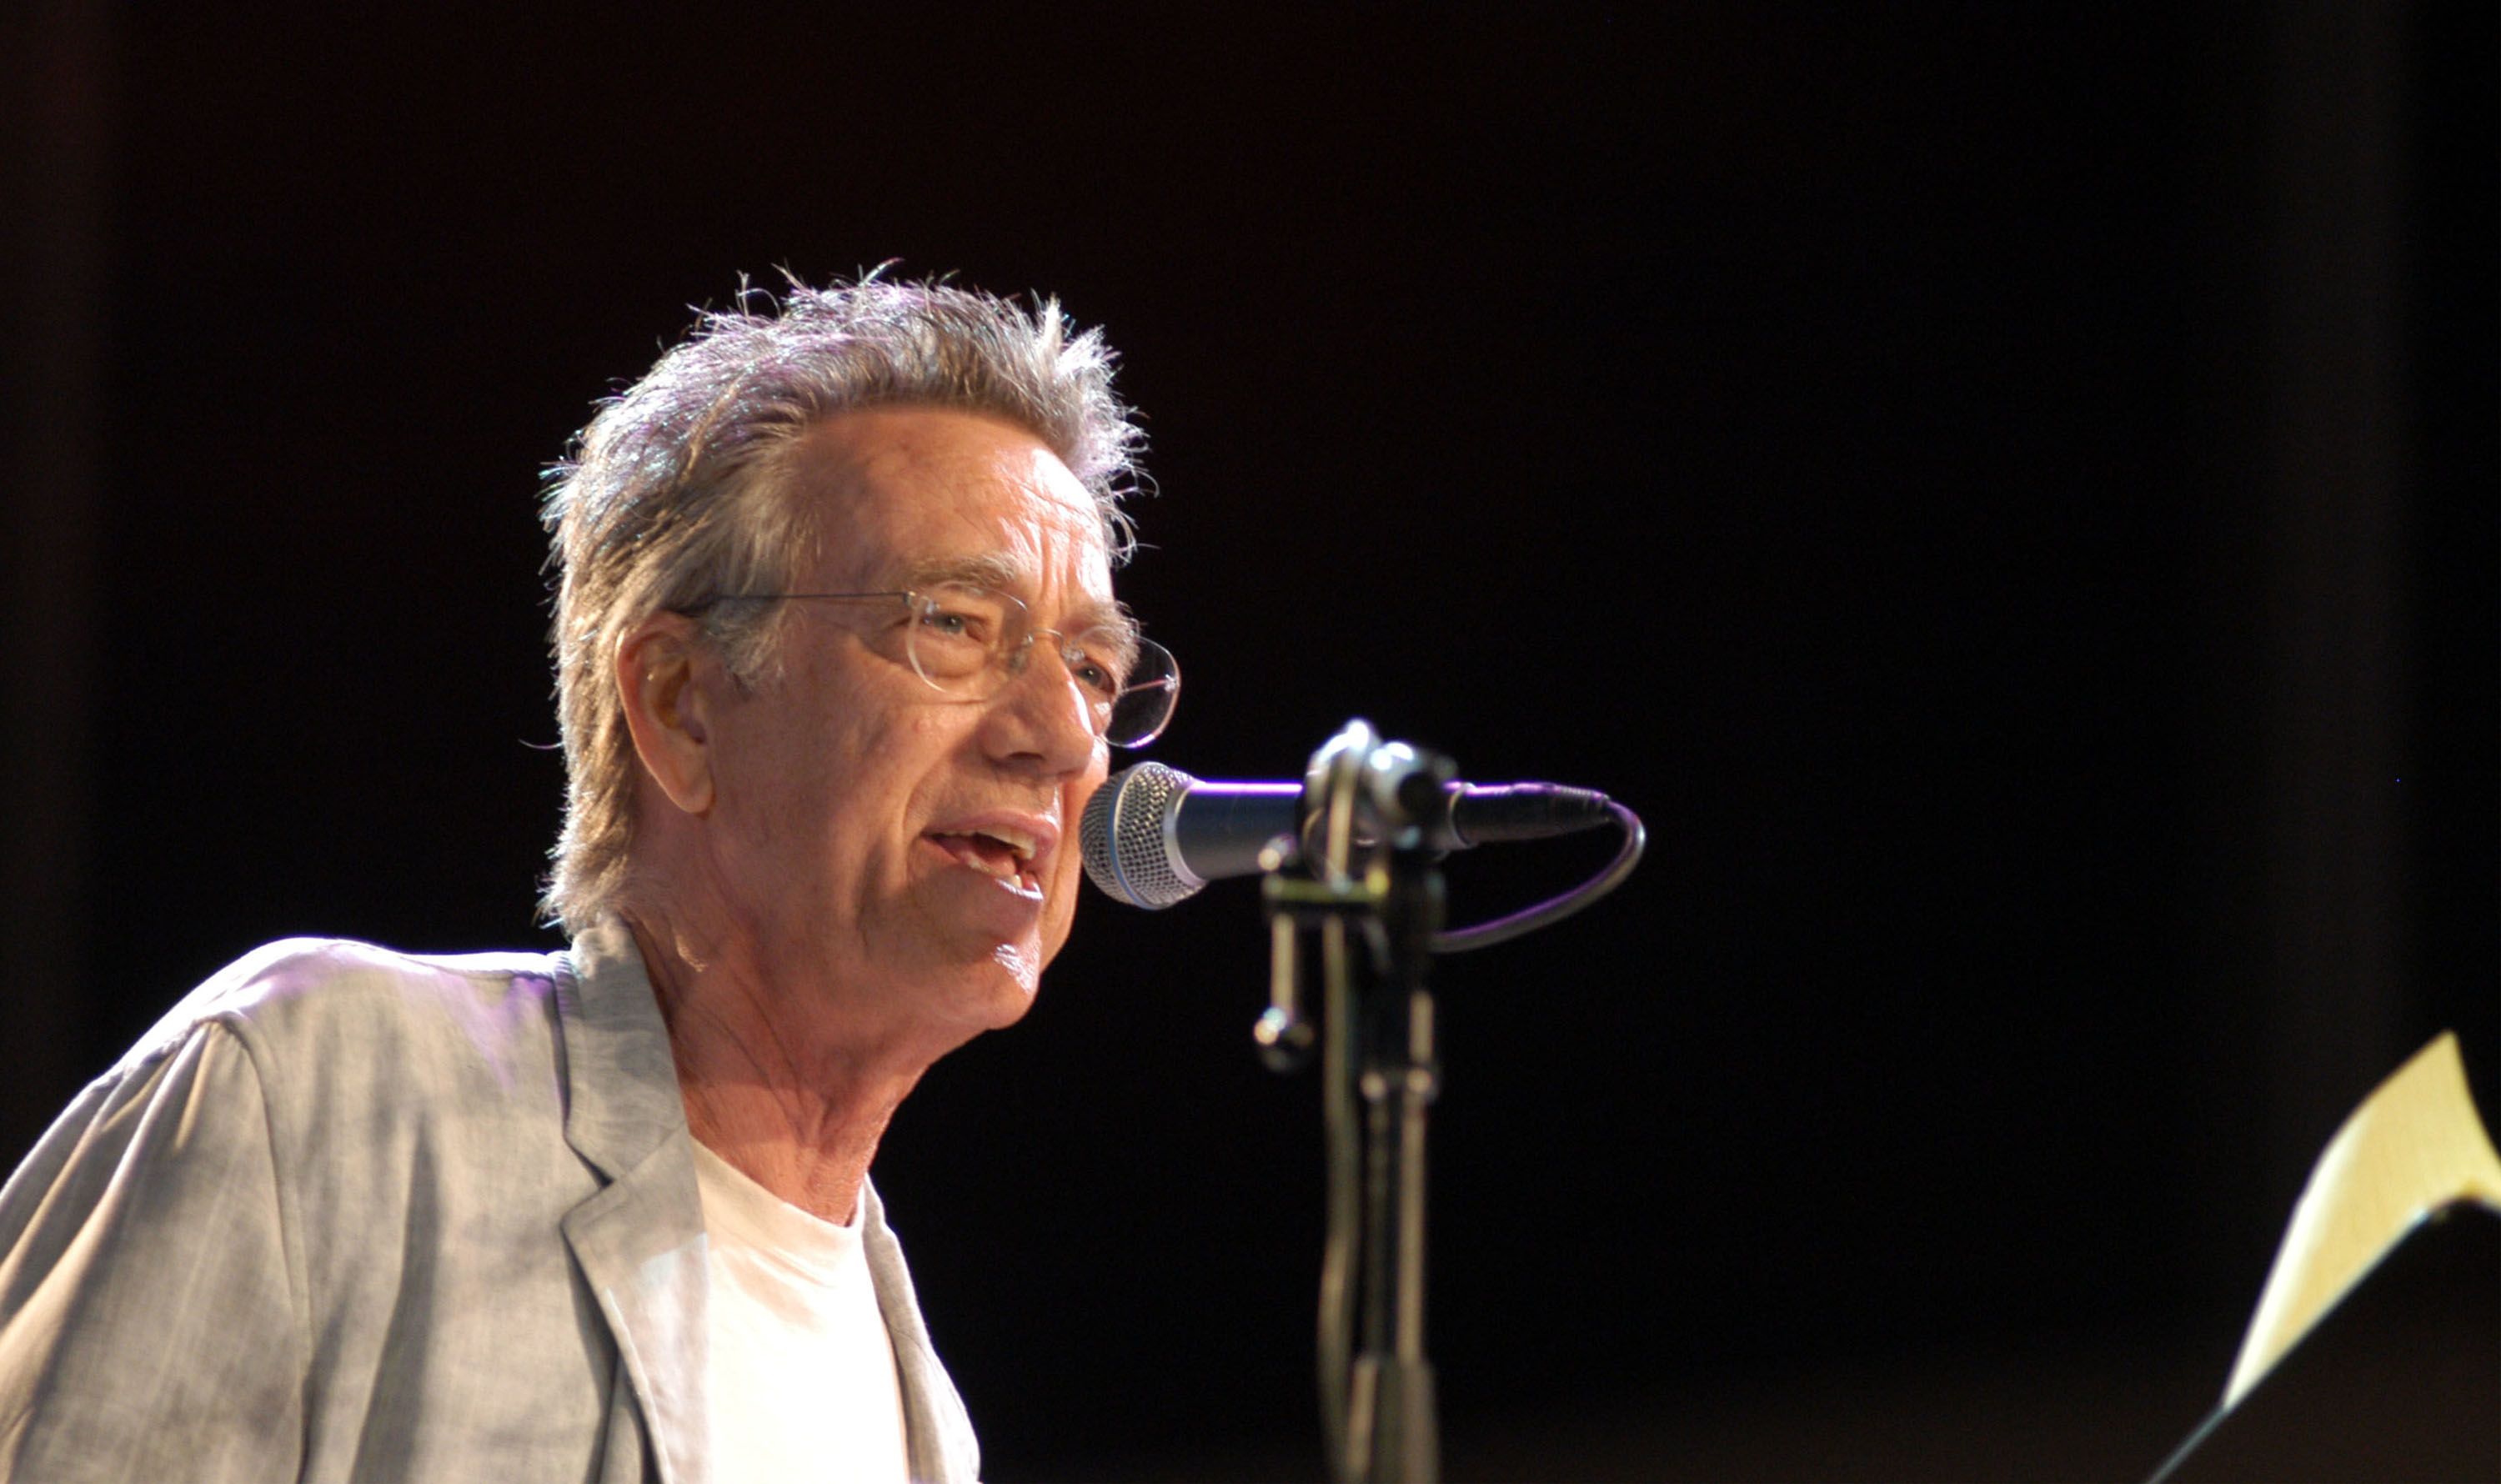 Ray Manzarek, 74, Rock Keyboardist And a Founder of the Doors, Is